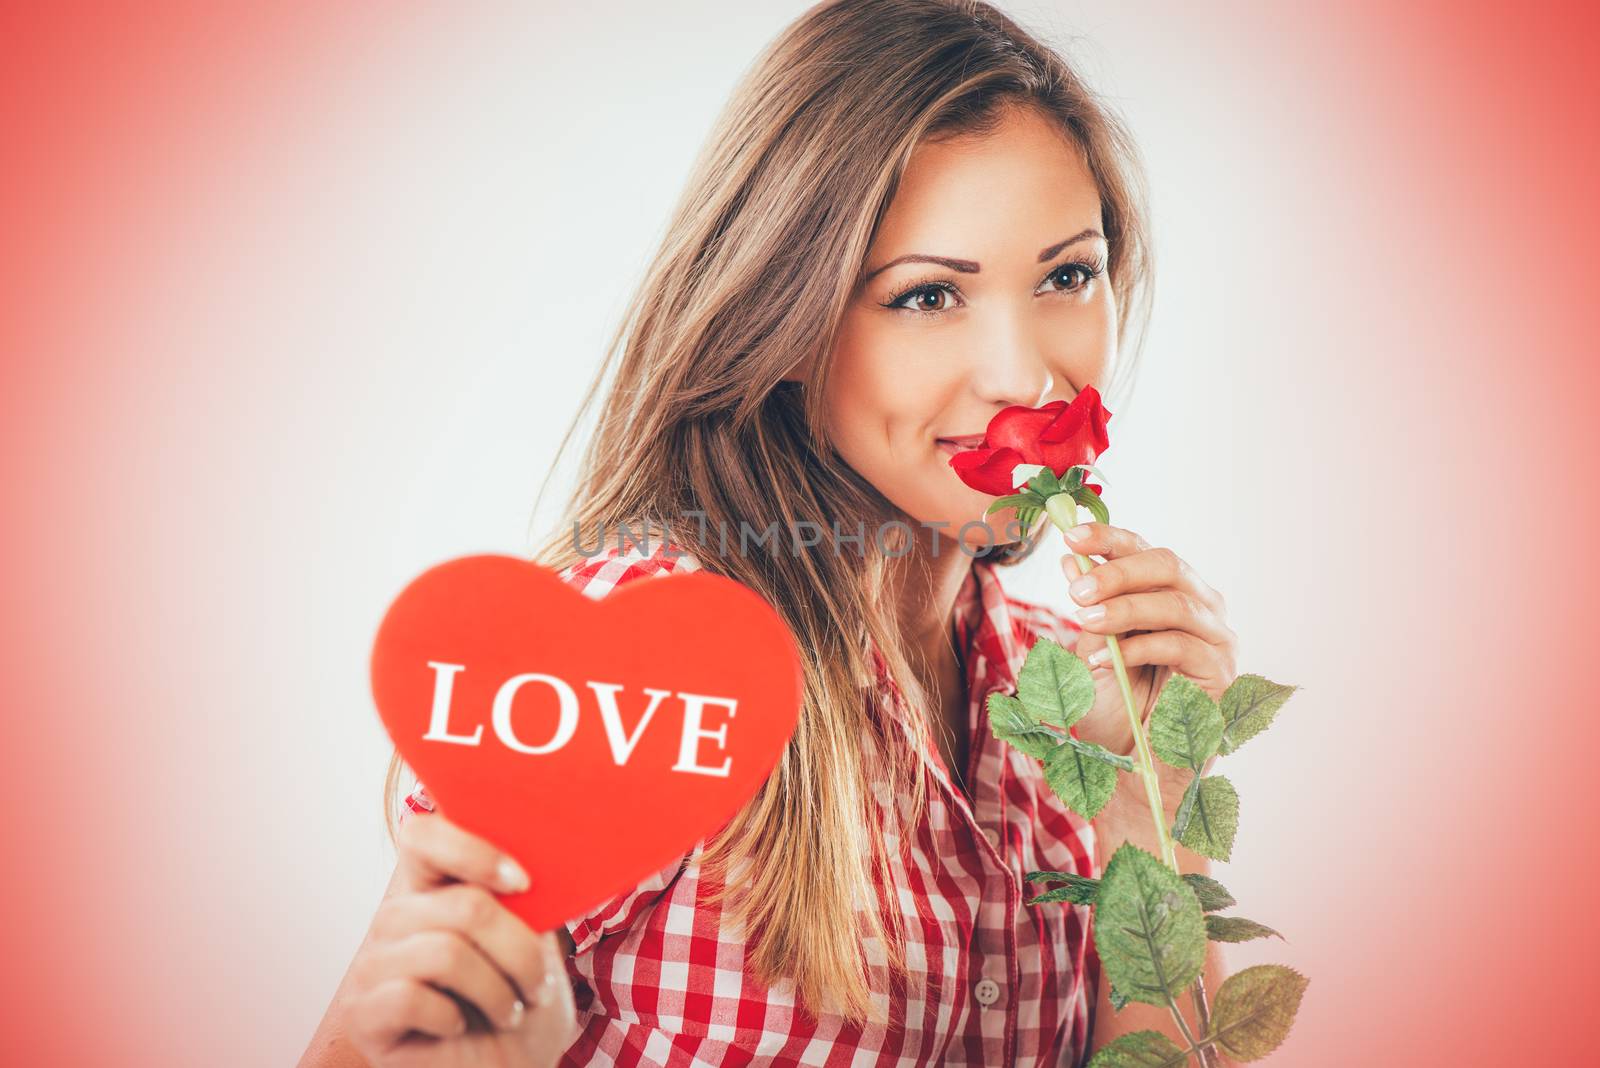 Portrait of a beautiful smiling girl holding a red heart and rose. Looking at camera.